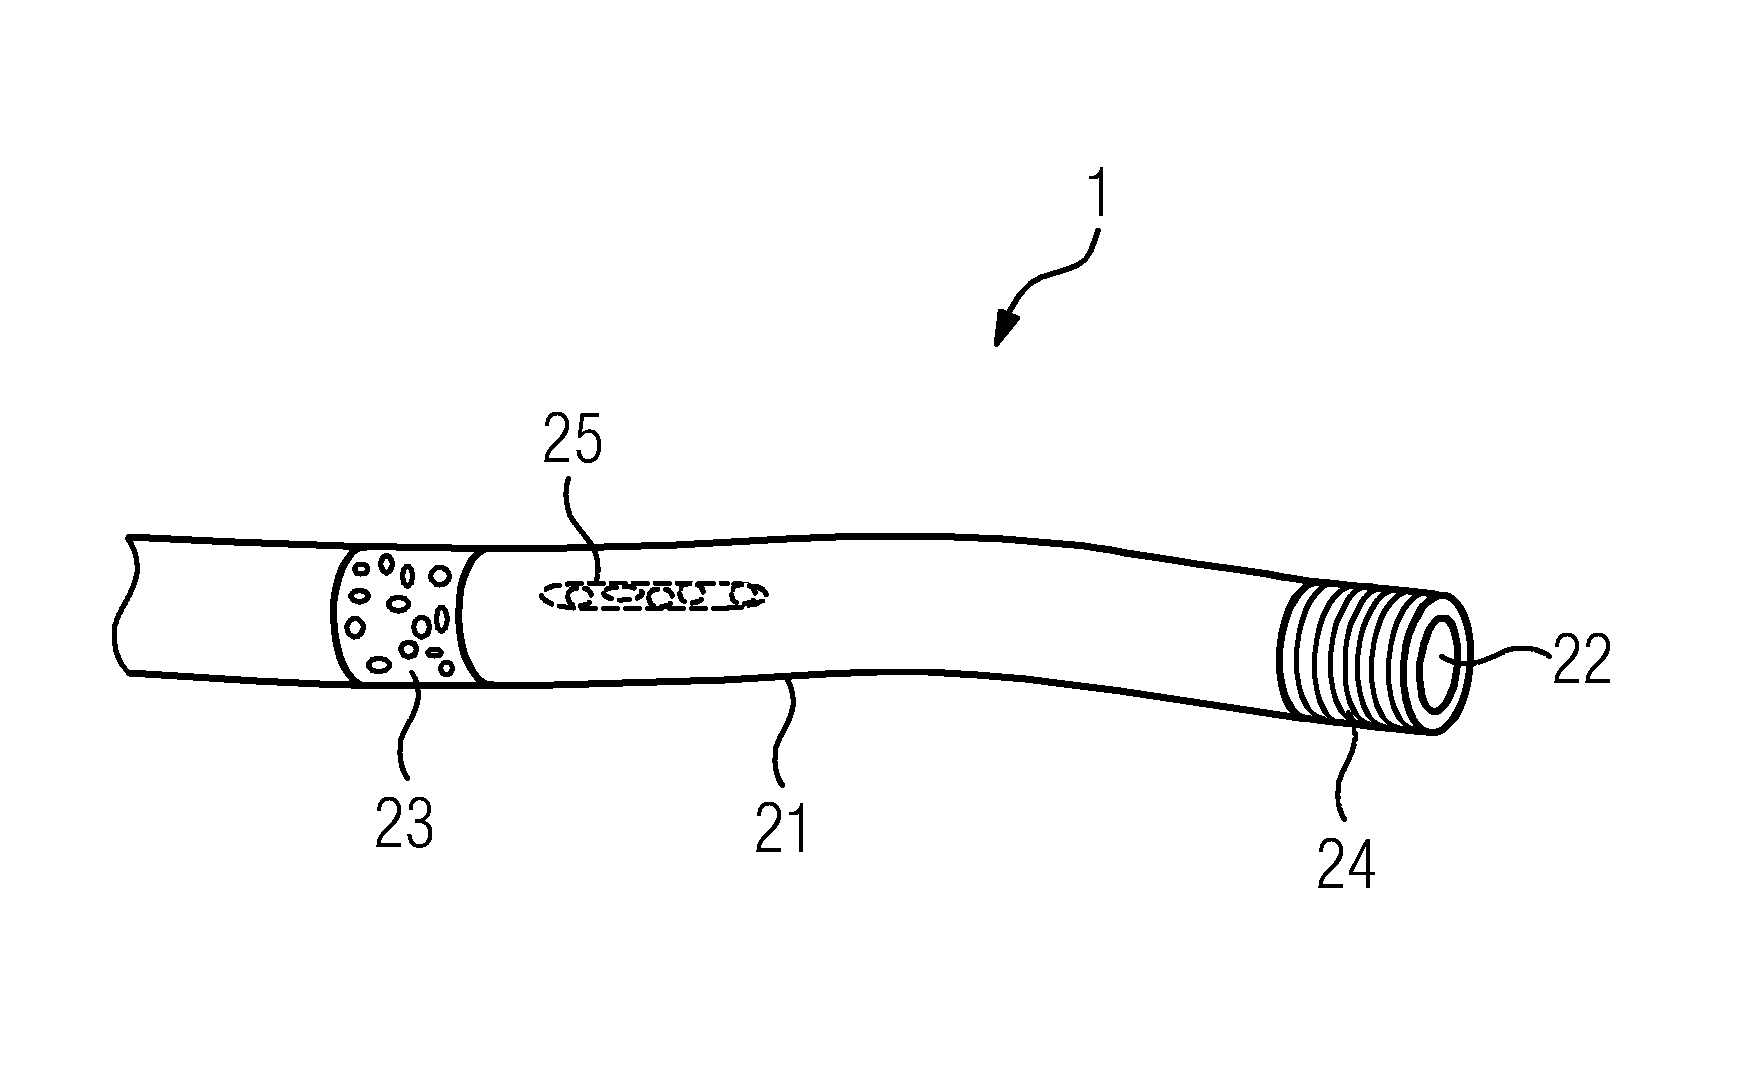 Medical instrument for use with a phase contrast imaging and x-ray recording system with phase contrast imaging